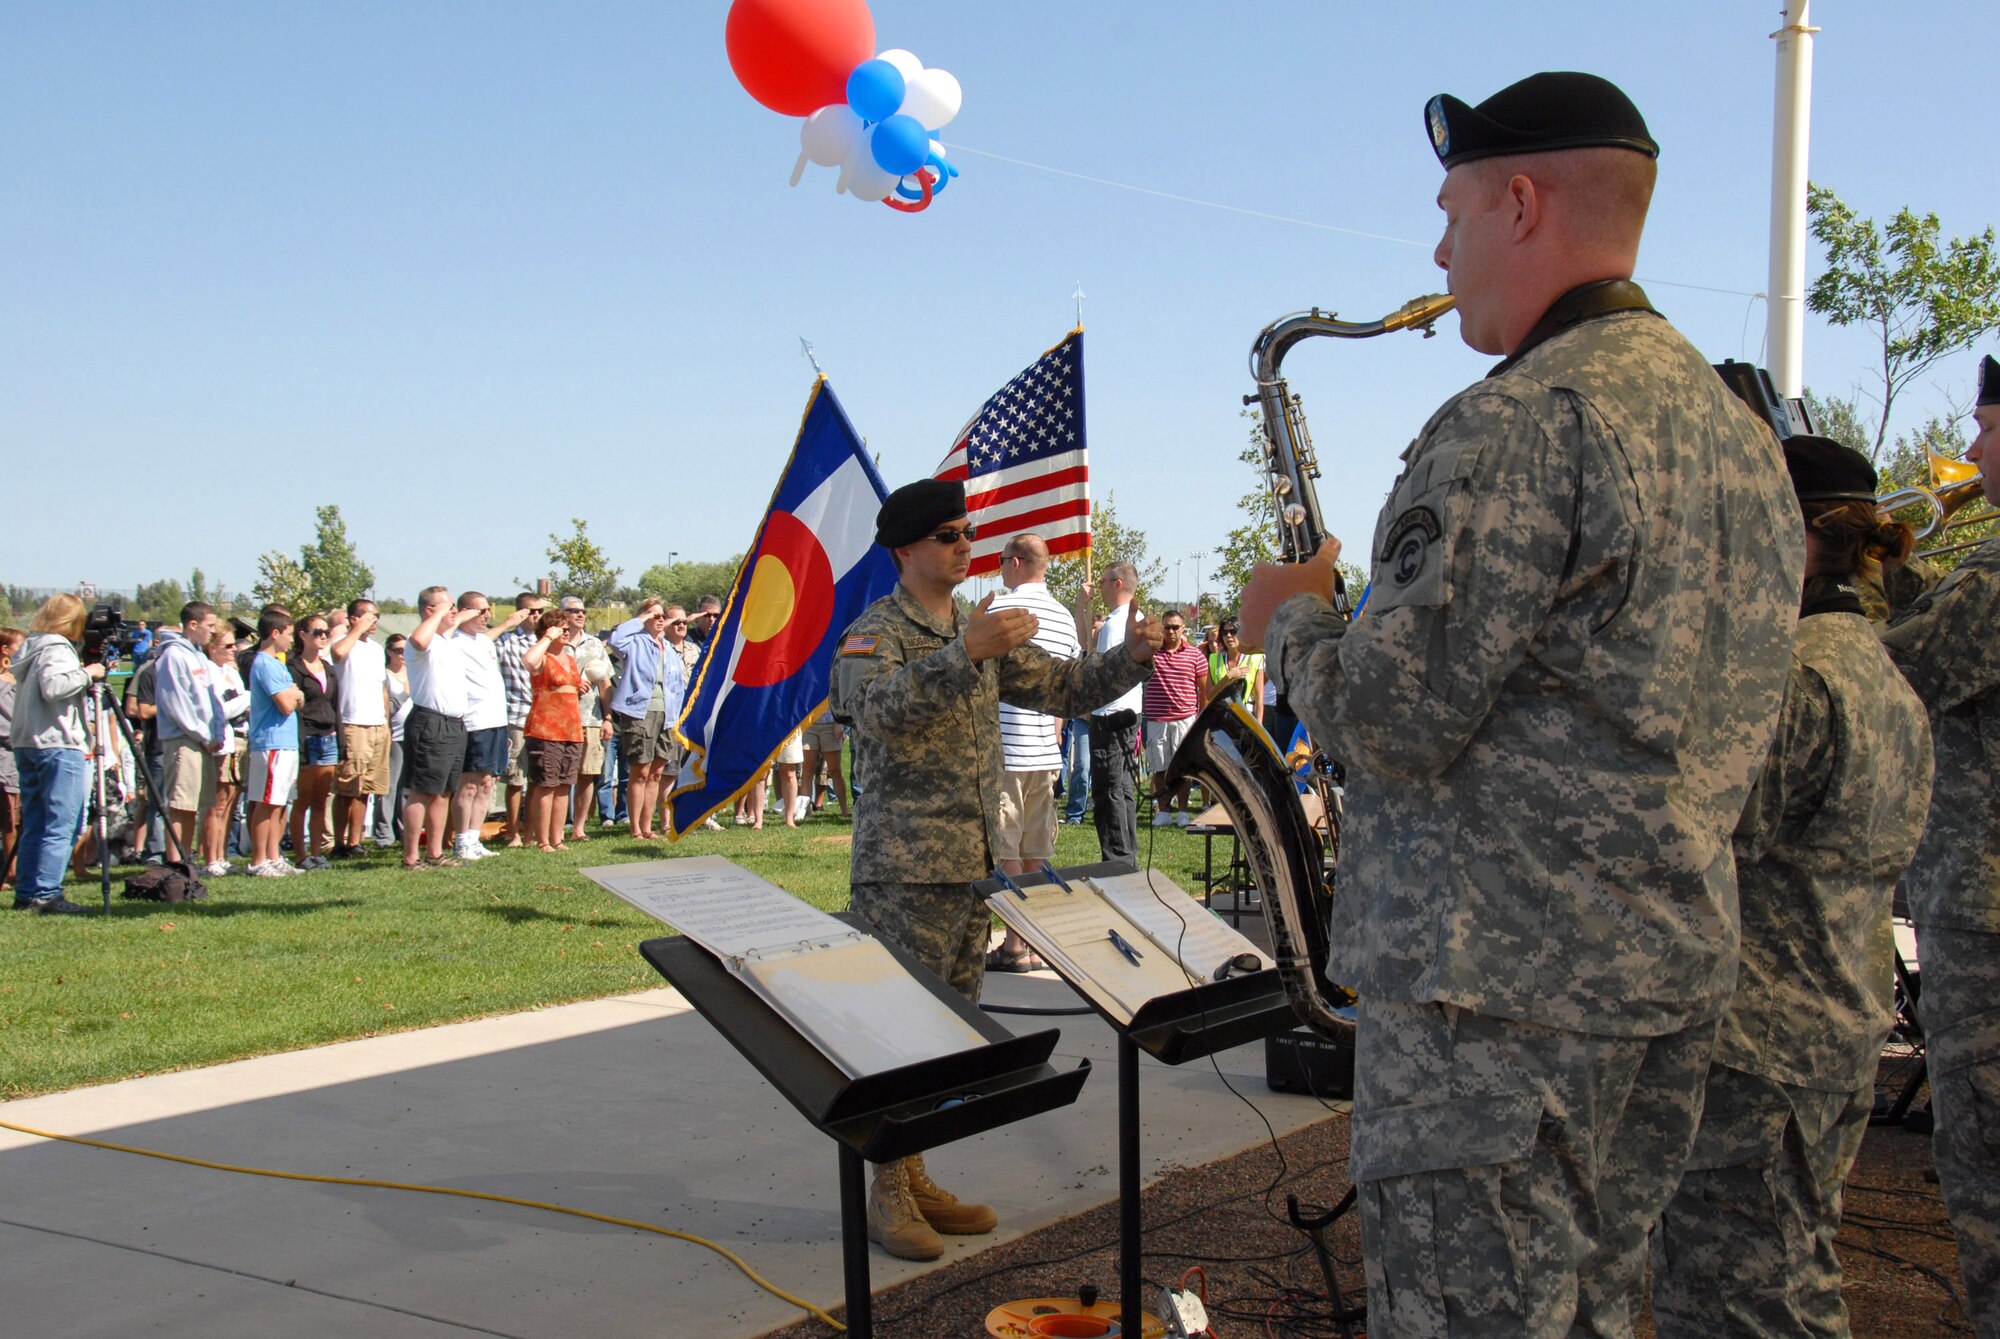 The 101st Army Band of the Colorado National Guard performs for the crowd at the Colorado Air National Guard's Welcome Home Ceremony on August 16th.